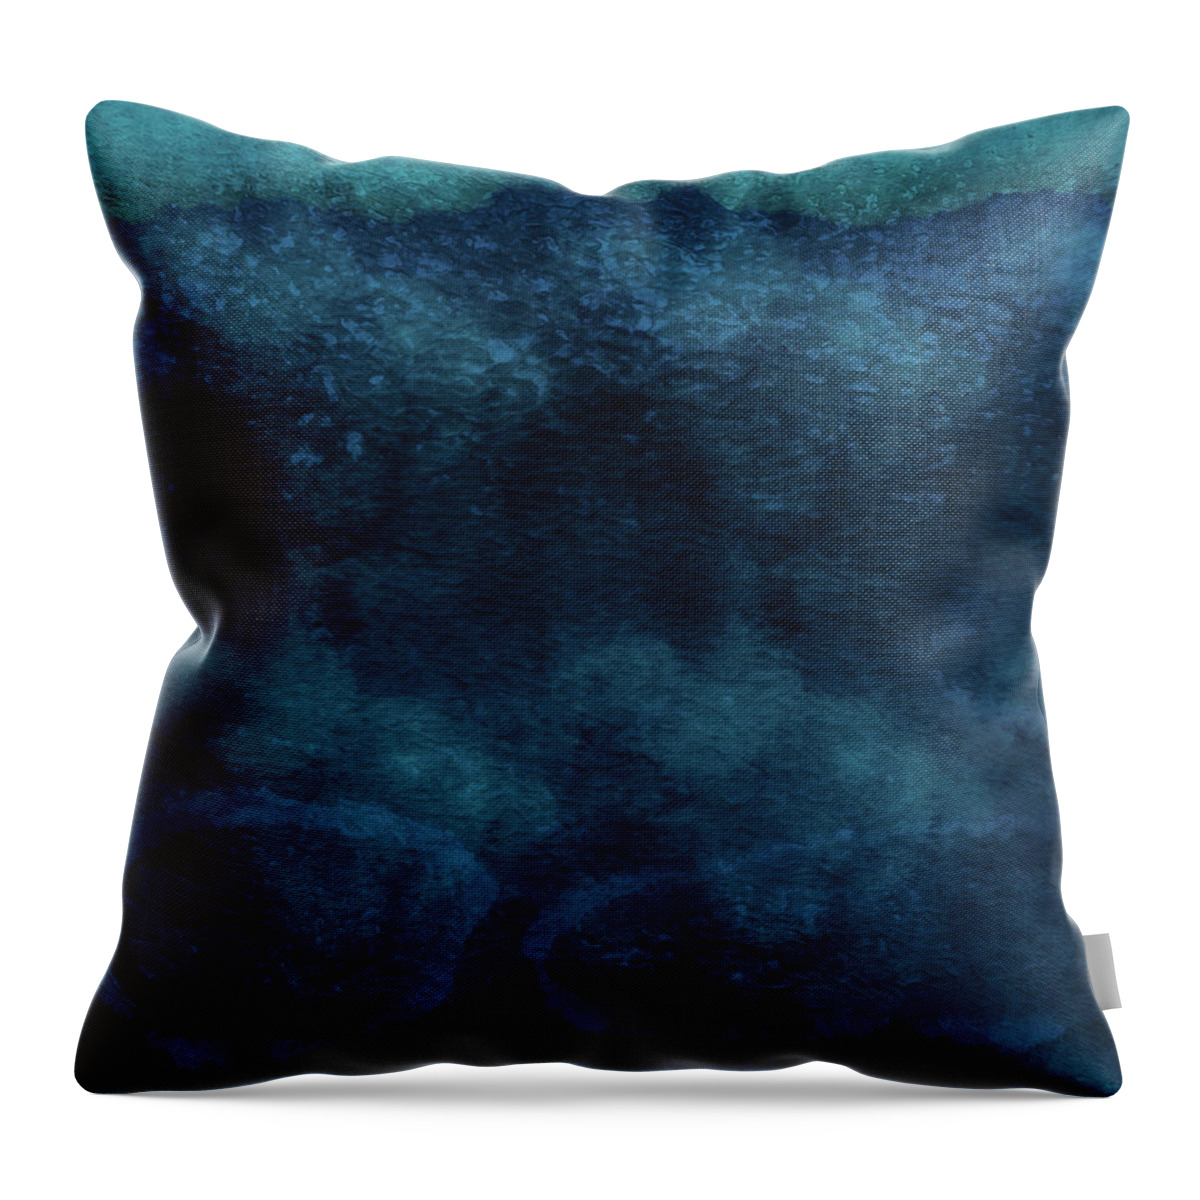 Water Throw Pillow featuring the mixed media Reflecting Pool- Art by Linda Woods by Linda Woods